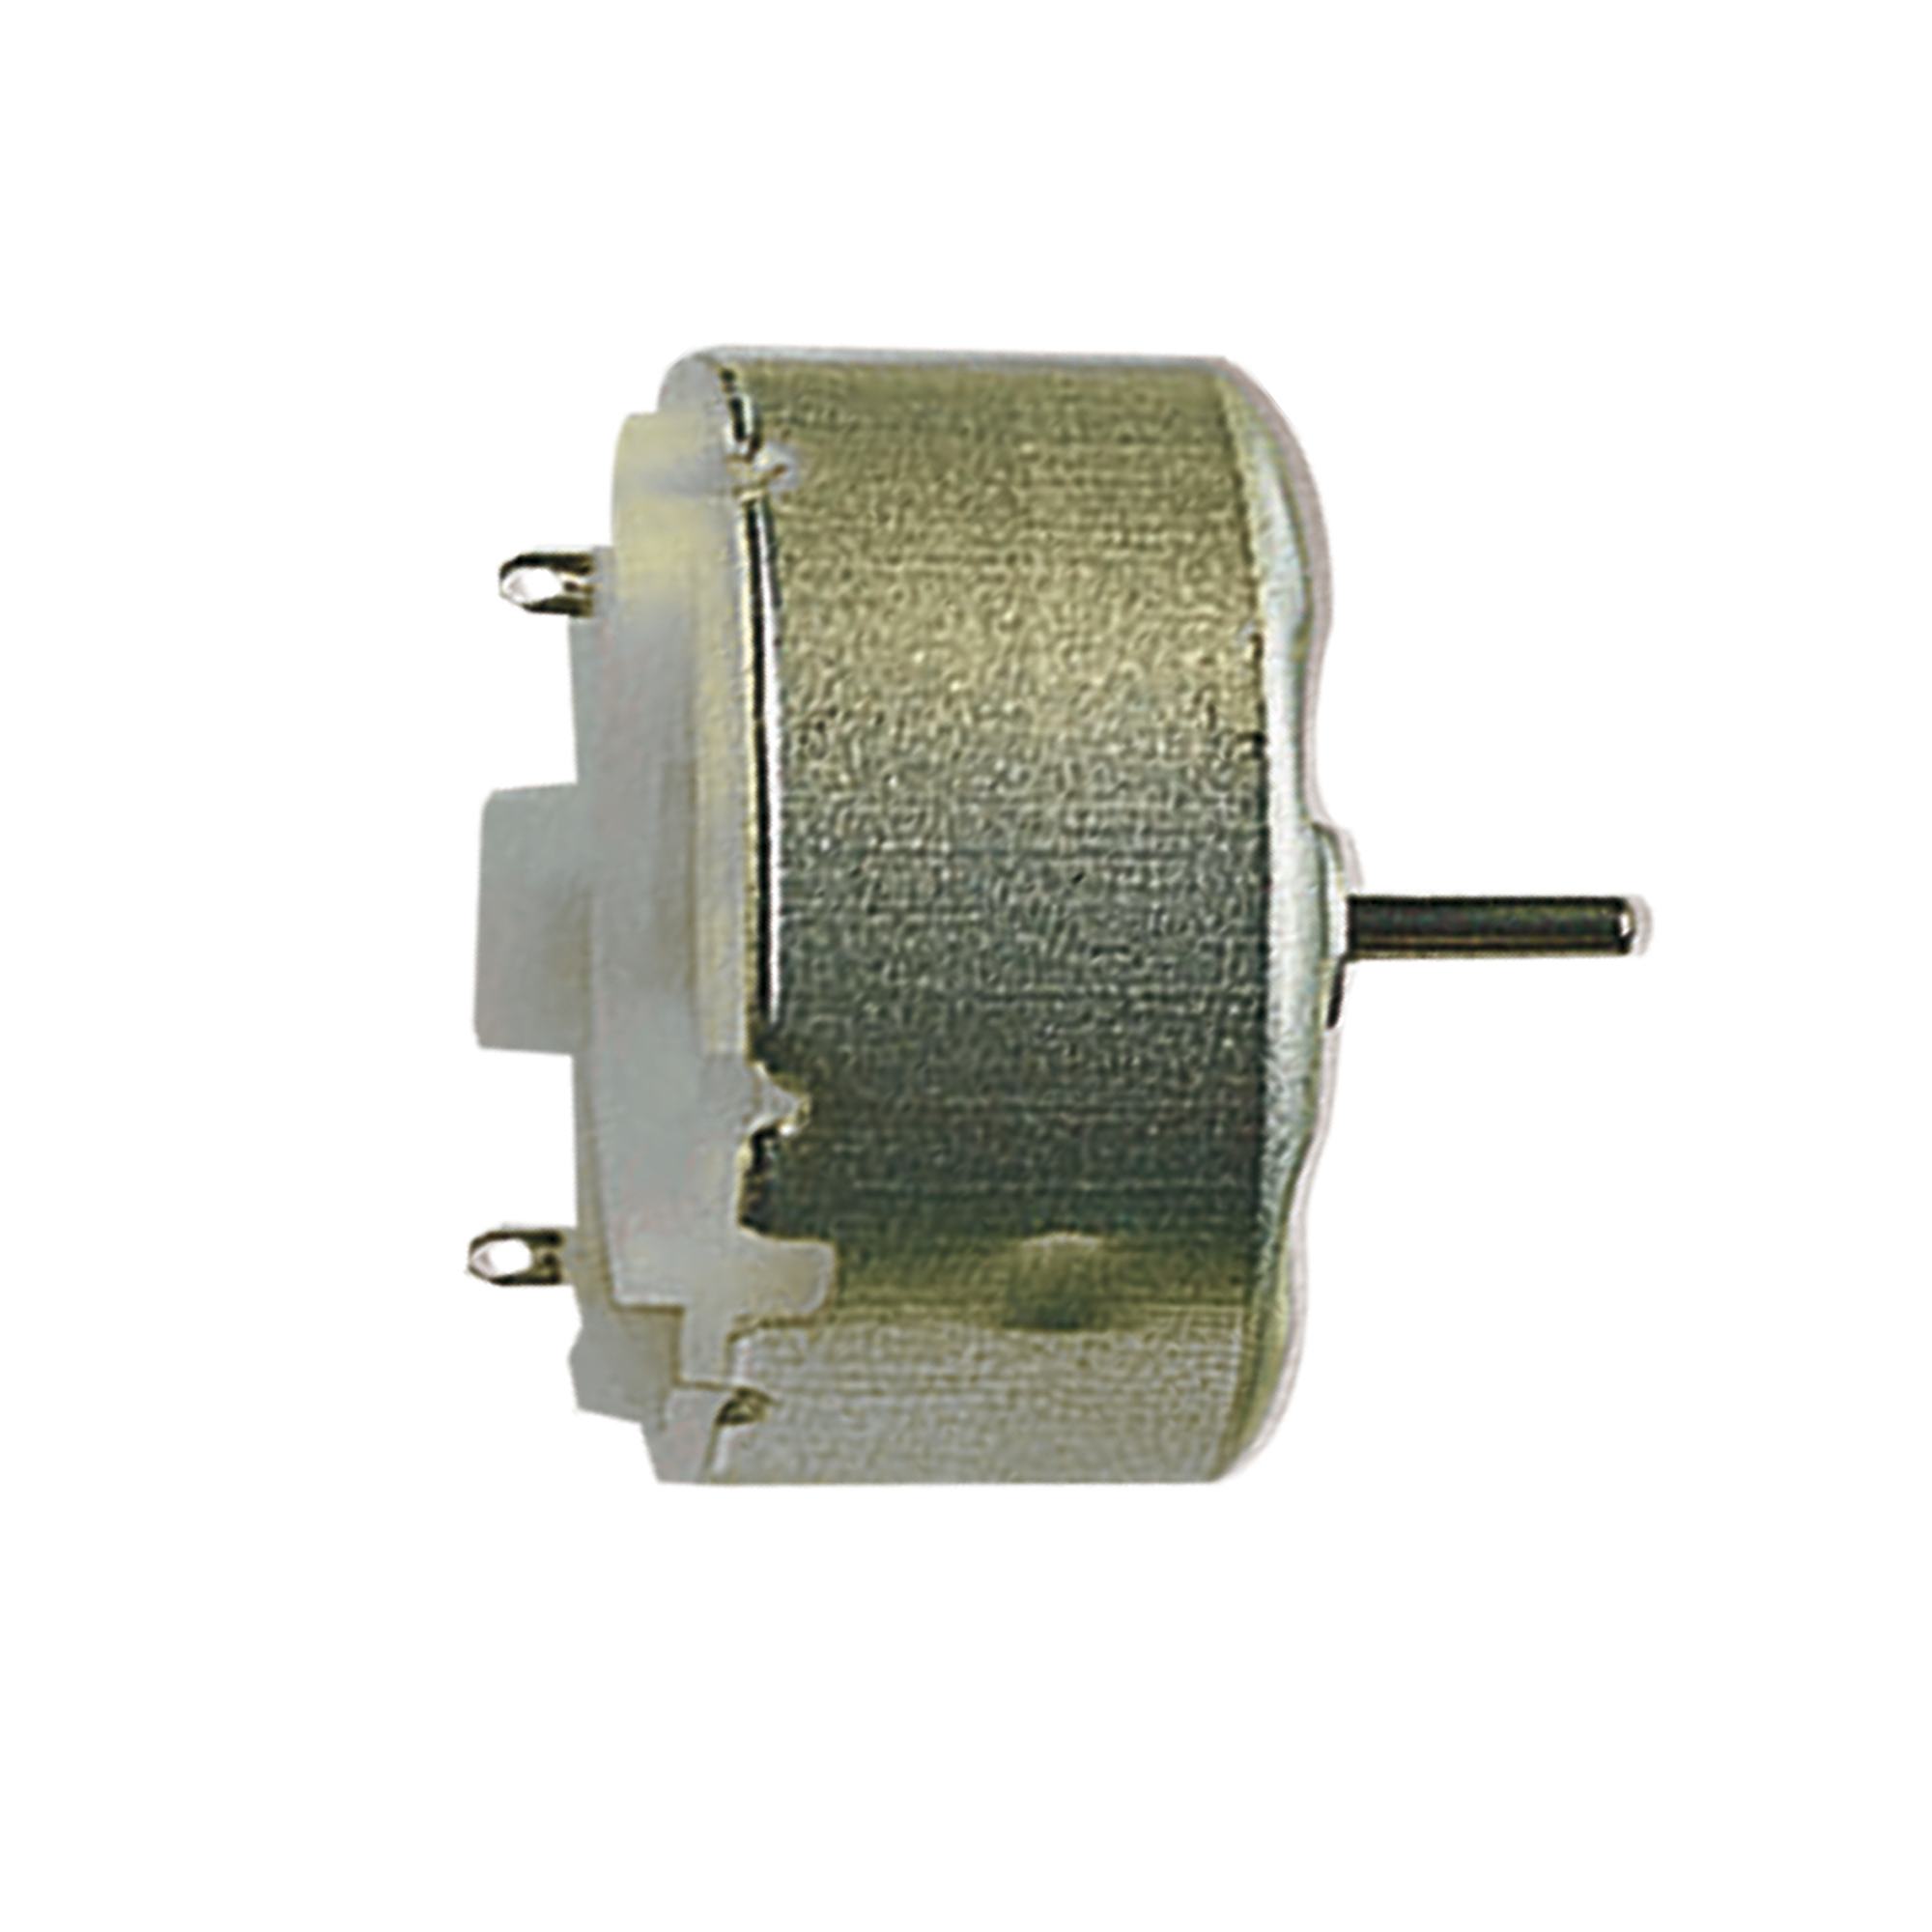 Low Inertia 6V Motor for use with Solar modules and Cells 2300rpm 